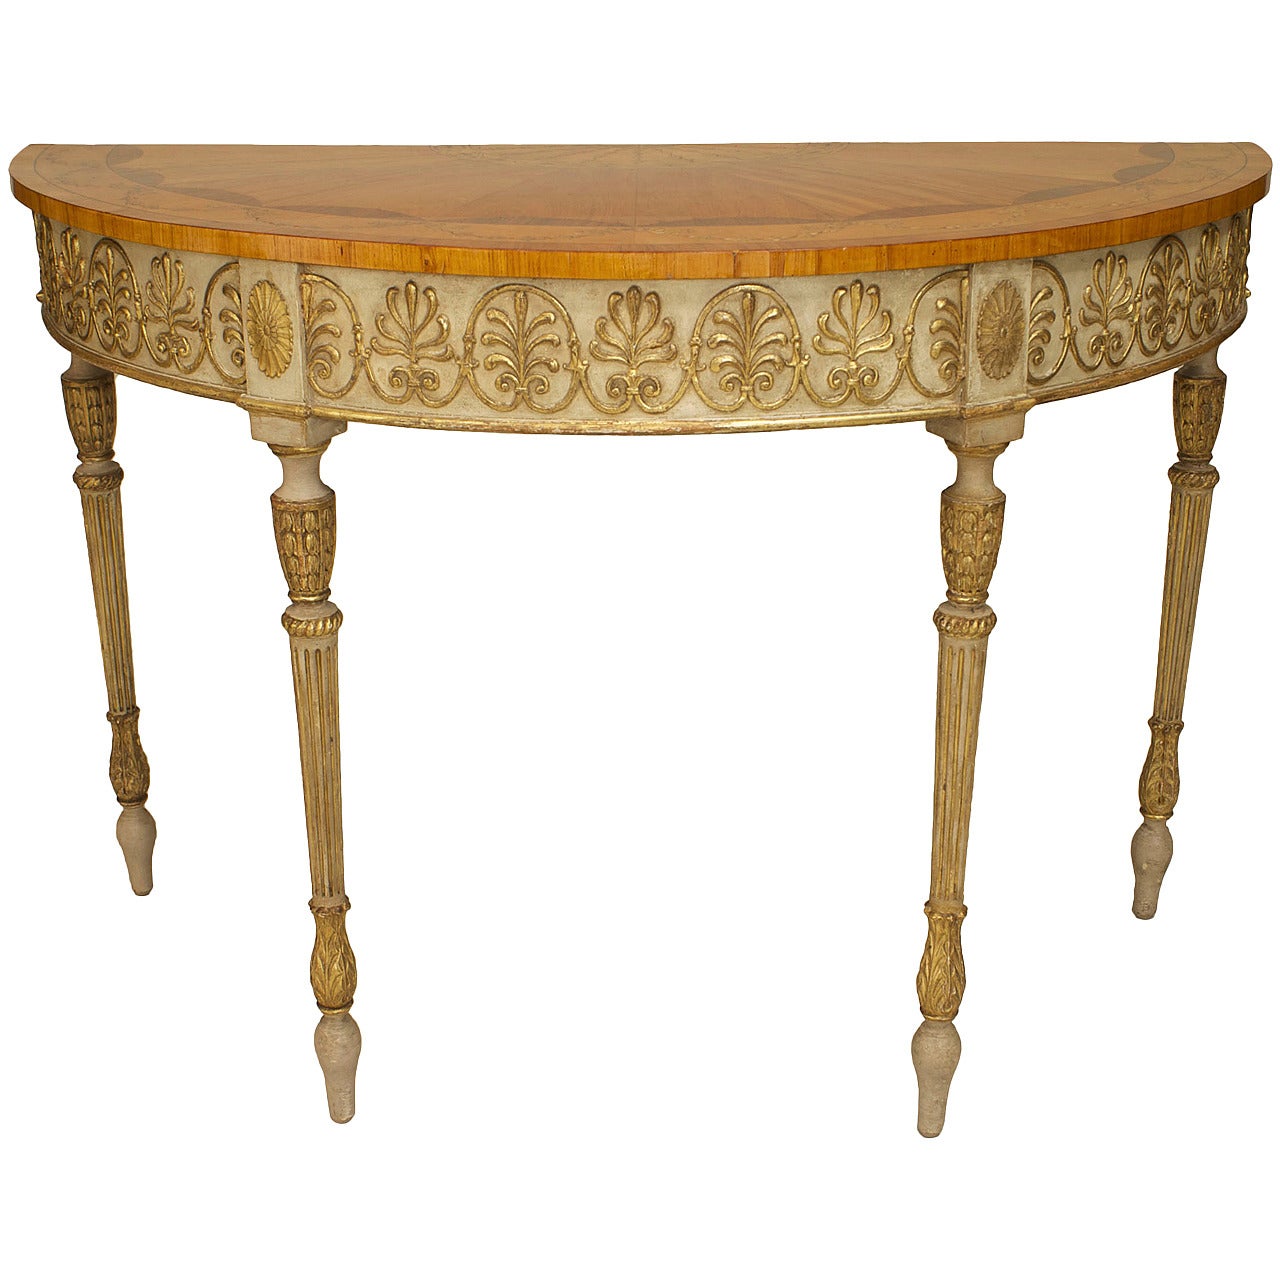 English George III Painted and Gilt Console Table